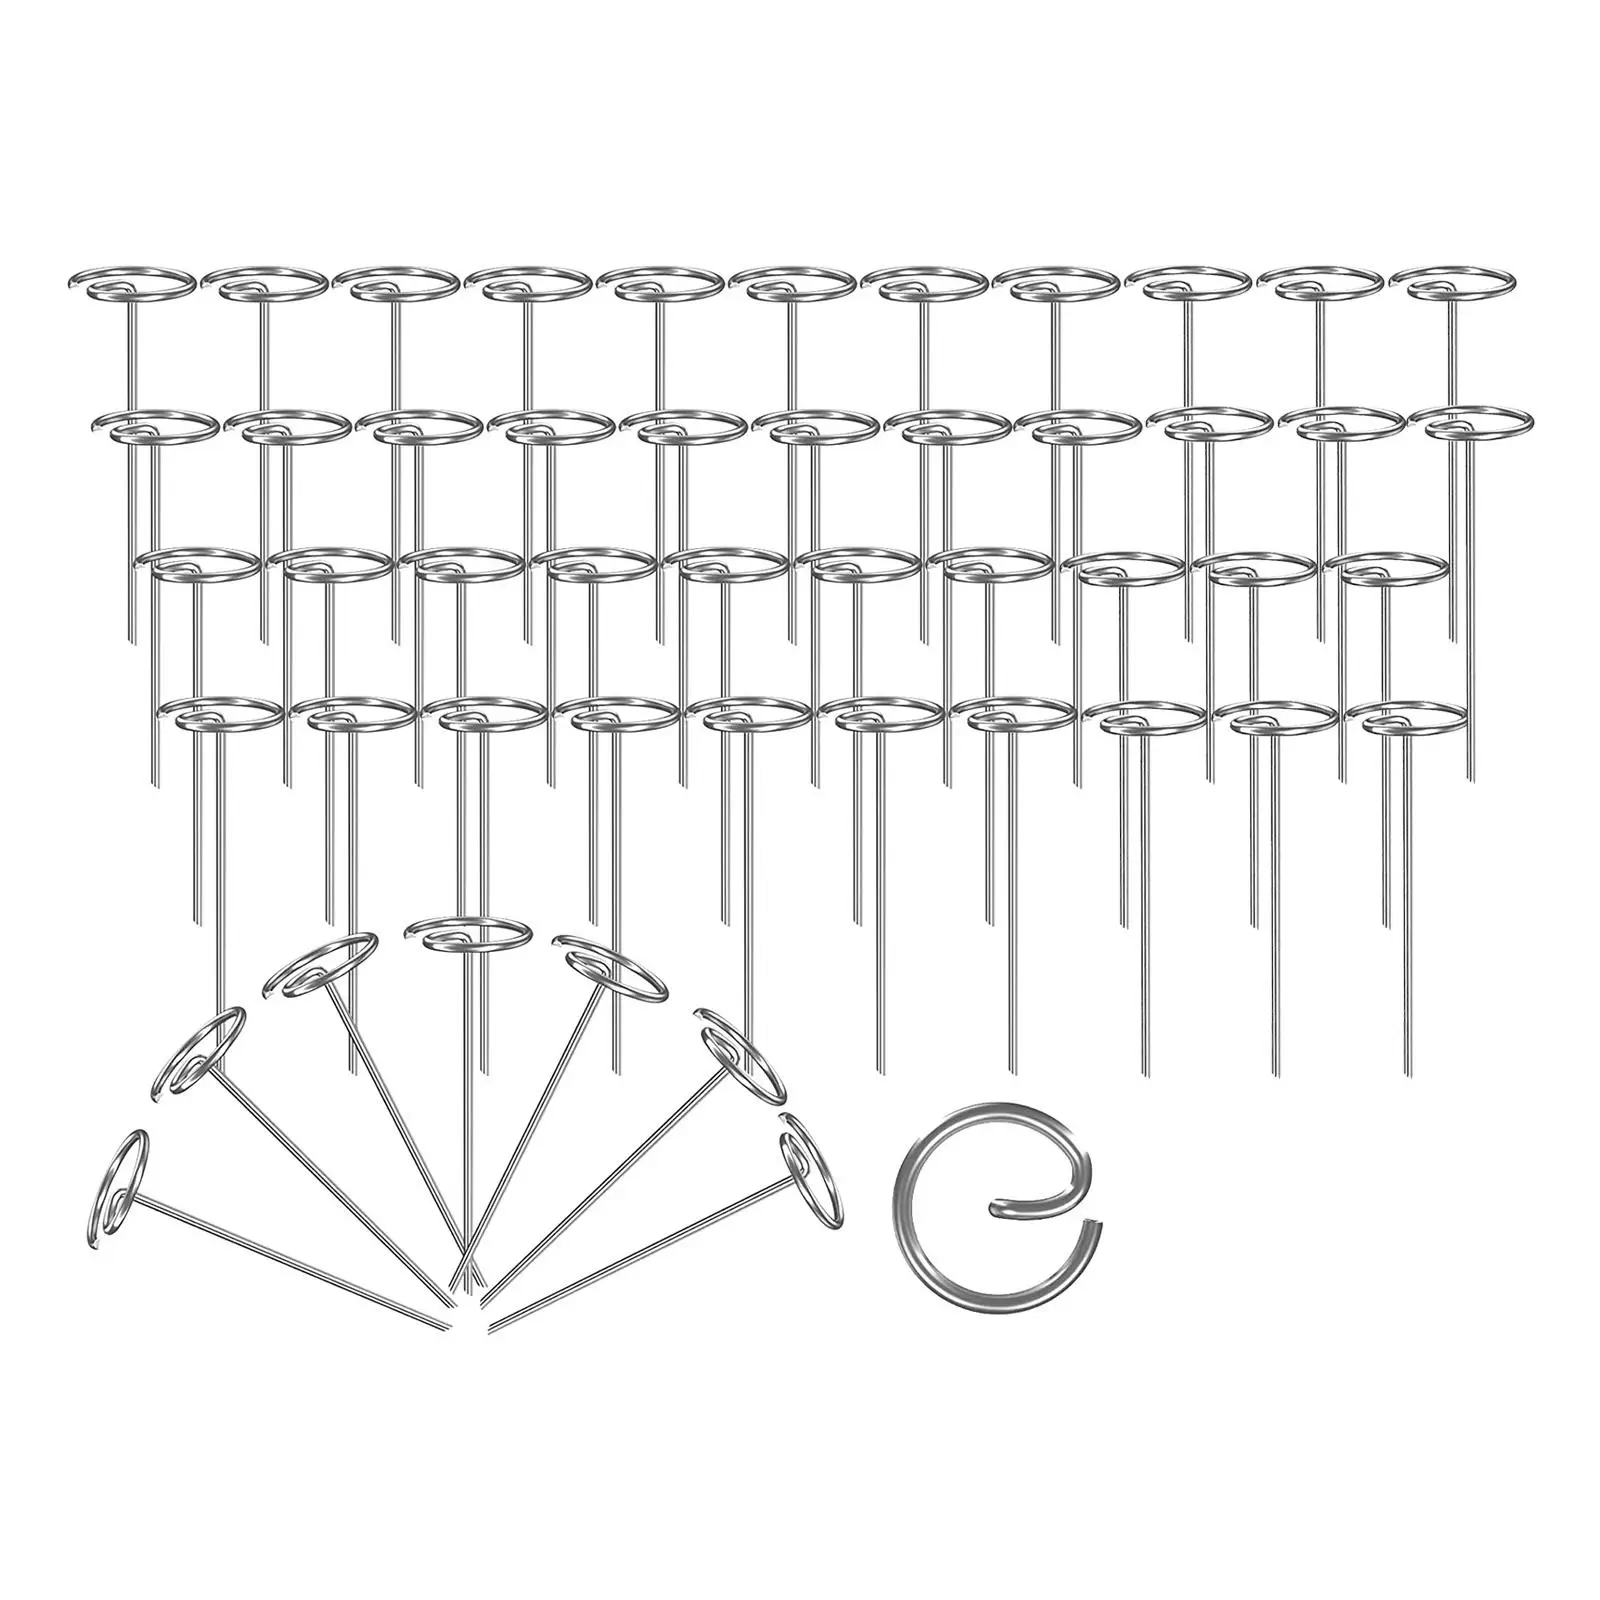 50 Pieces Circle Top Pins Heavy Duty Yard Stakes Landscape Pins sod Staples for Gardening fabric Tent Outdoor